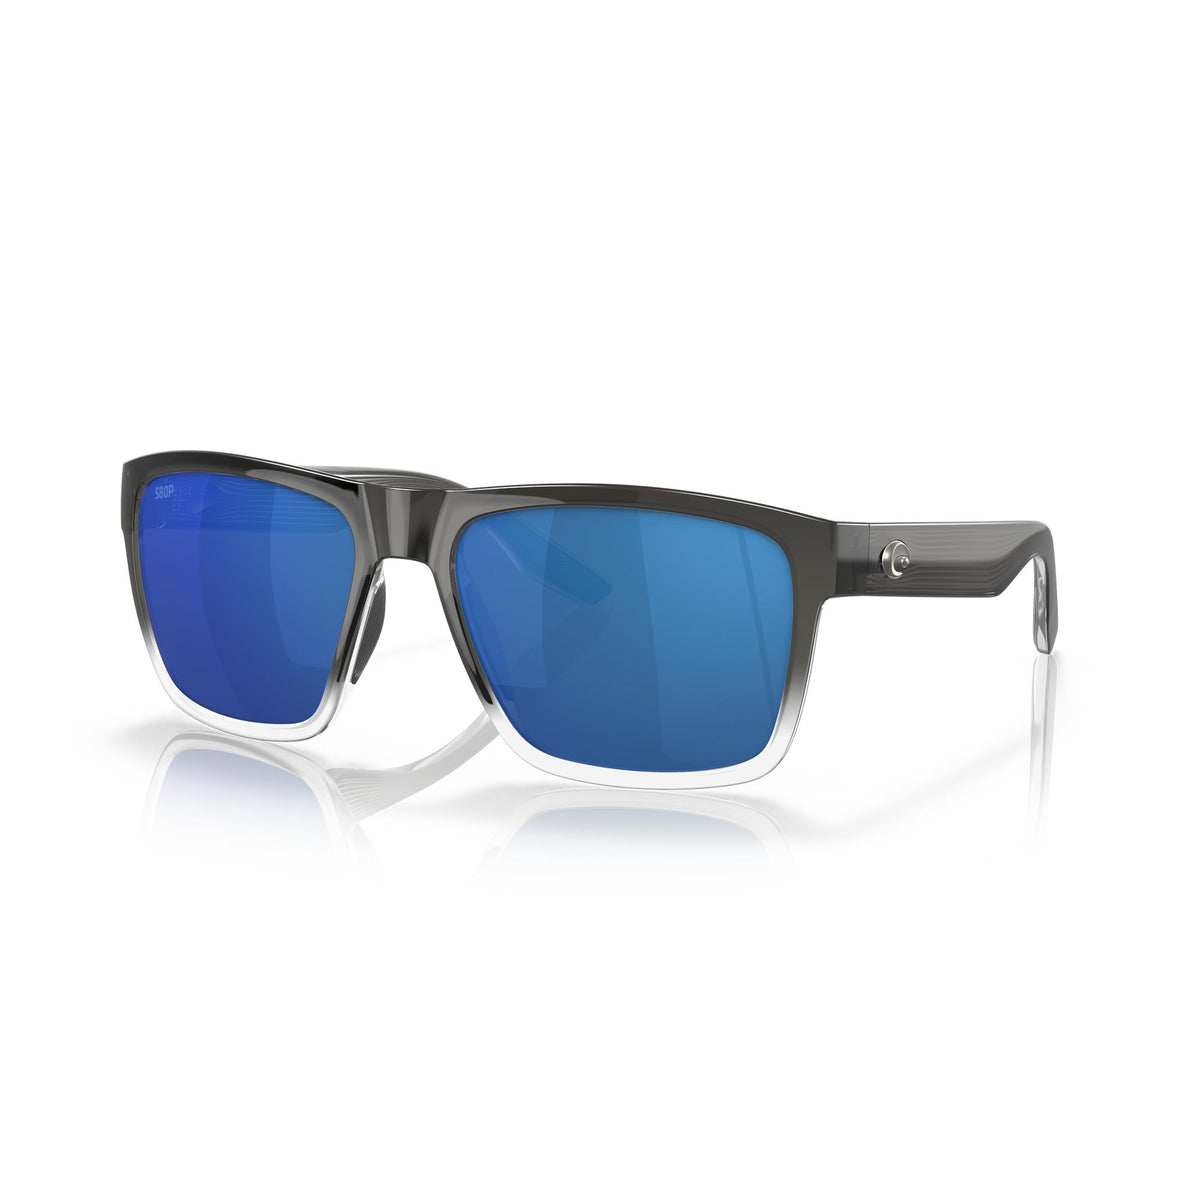 View of Sunglasses Costa Paunch XL Fog Gray Blue Mirror 580P available at EZOKO Pike and Musky Shop